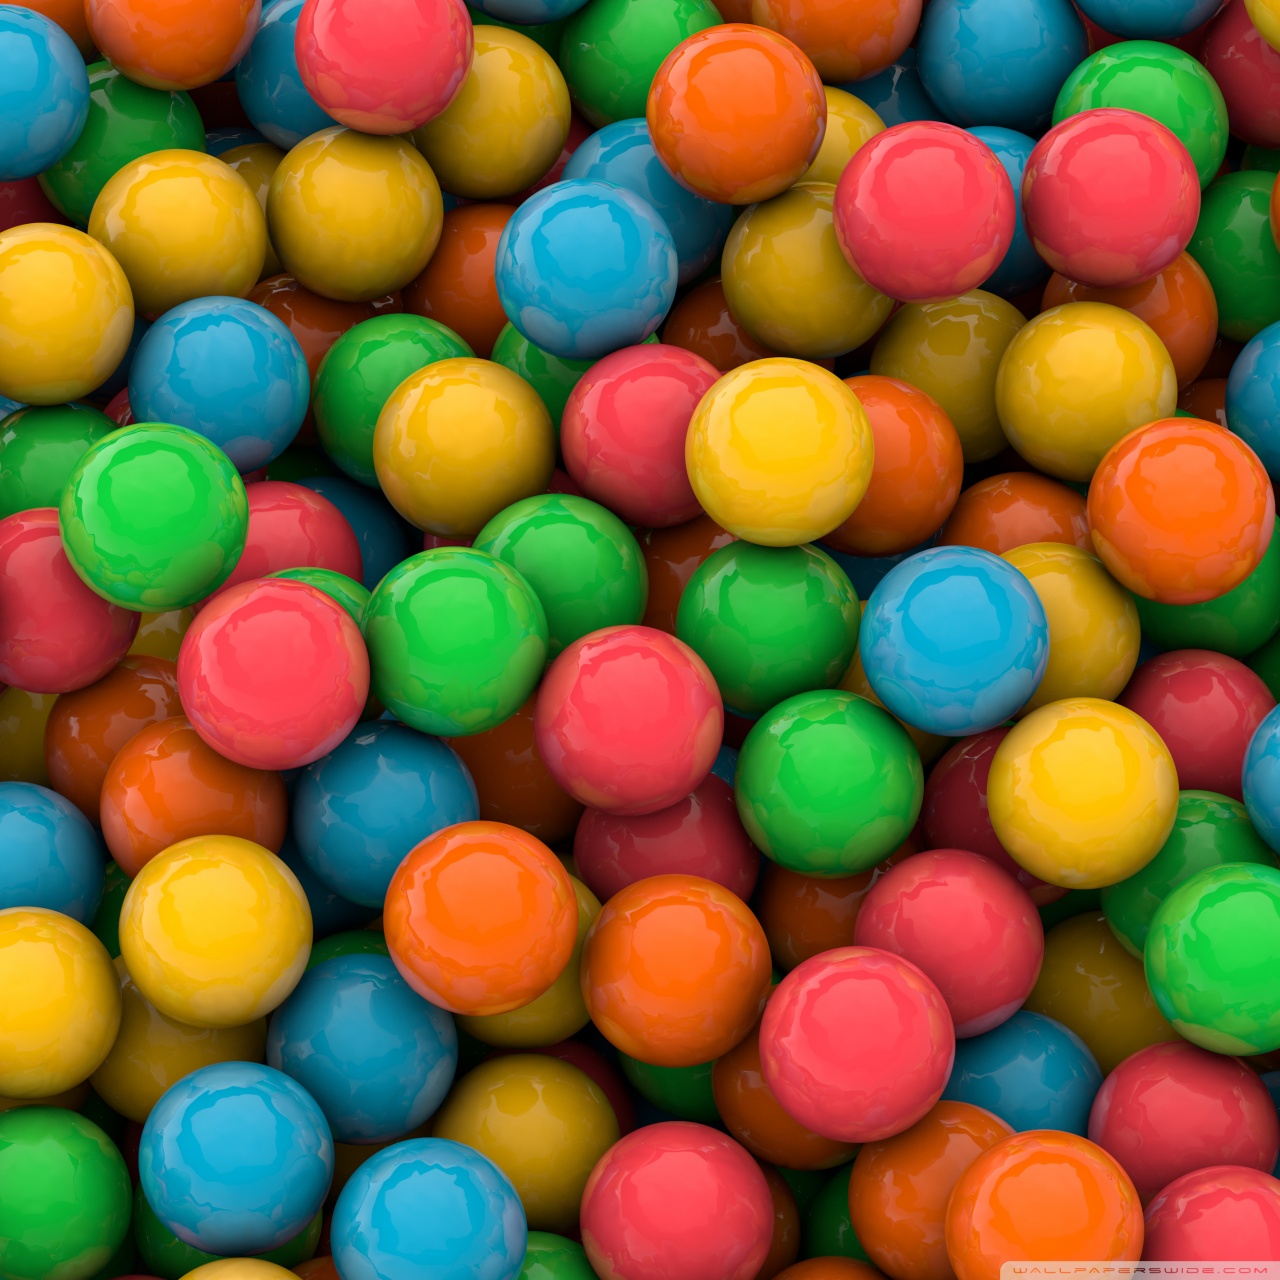 The Color Of Candies 4K HD Desktop Wallpaper For Dual Monitor